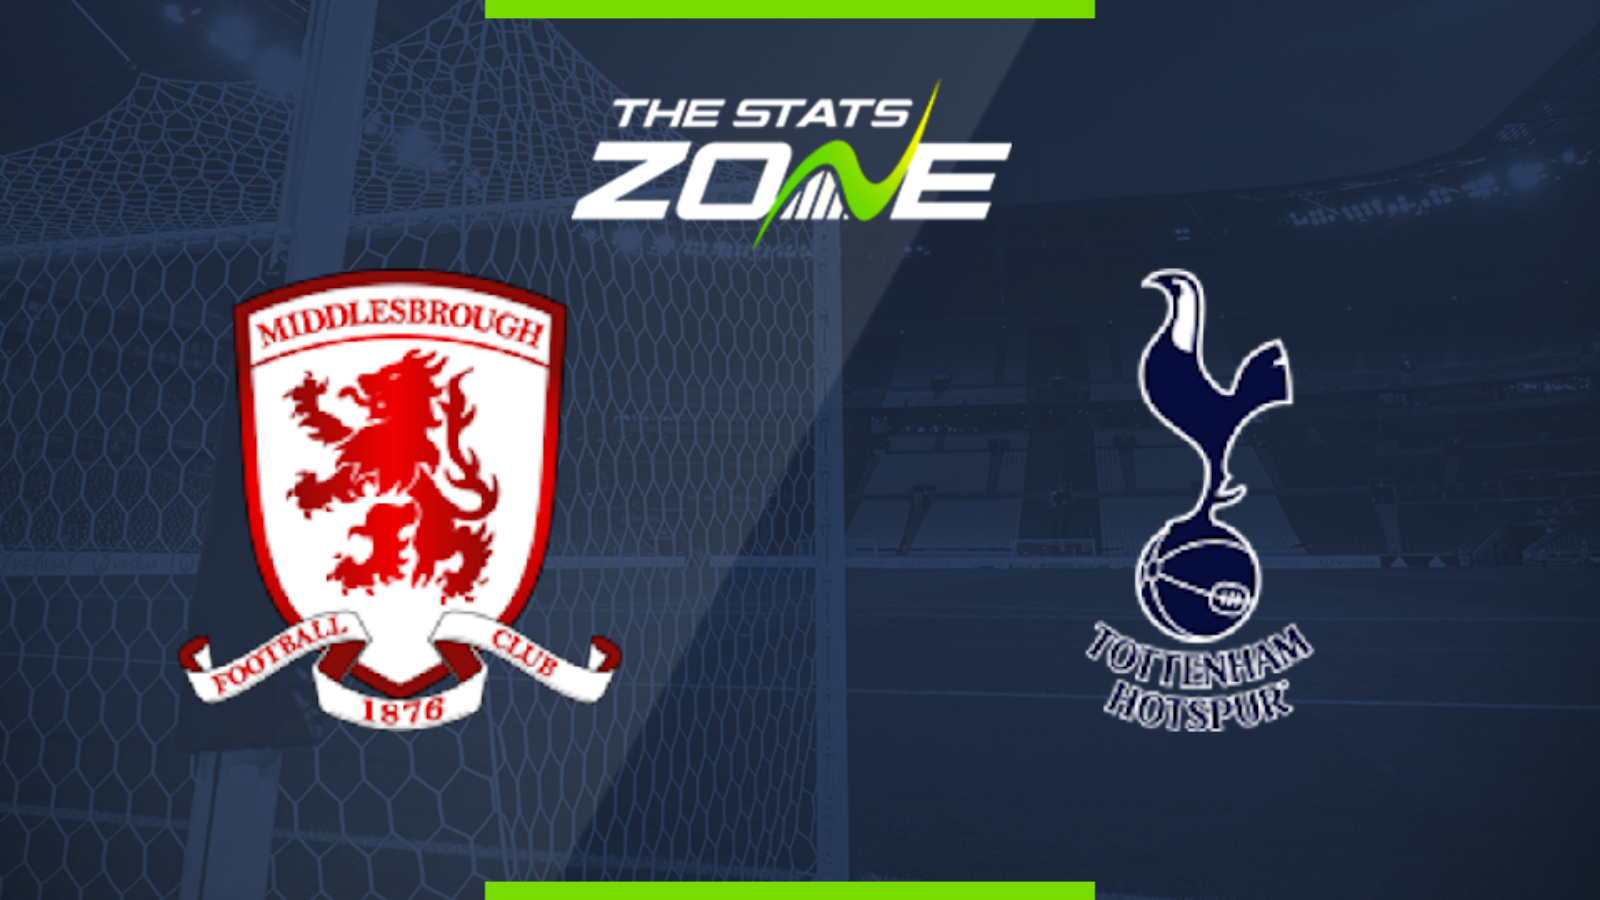 2019-20 FA Cup – Middlesbrough vs Tottenham Preview & Prediction - The Stats Zone1600 x 900